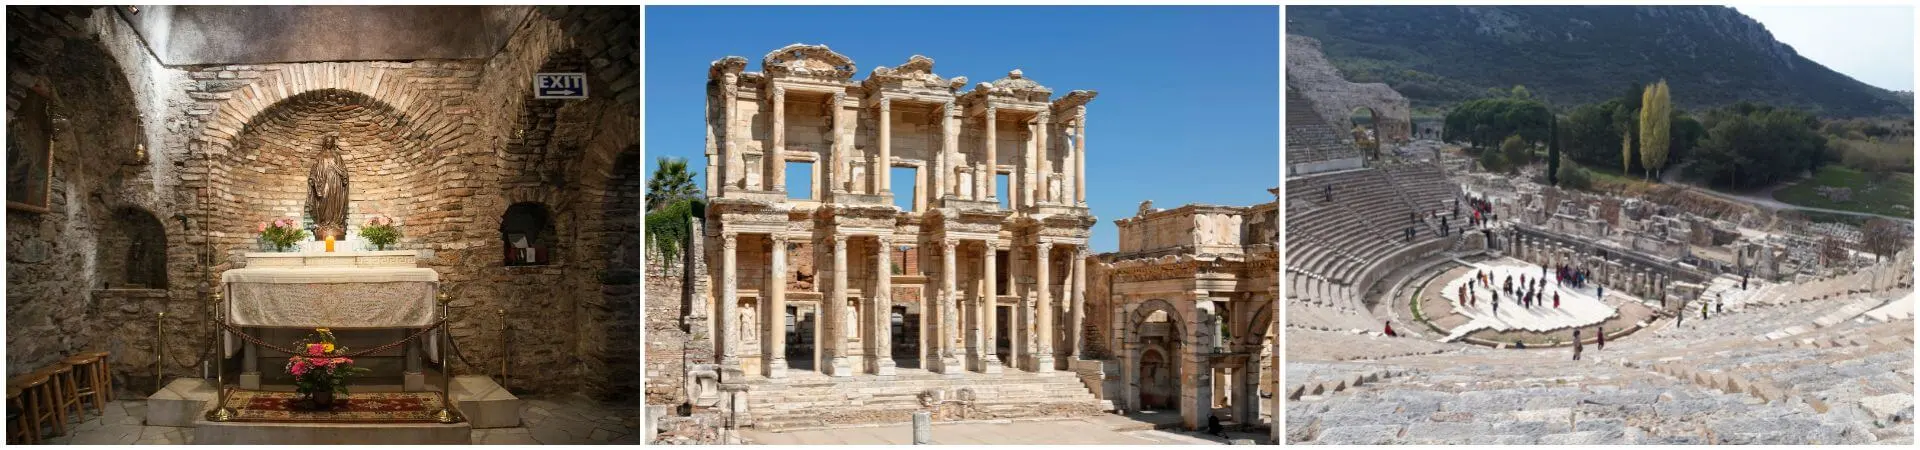 Ephesus & Virgin Mary House Tour From Istanbul (Discounted)